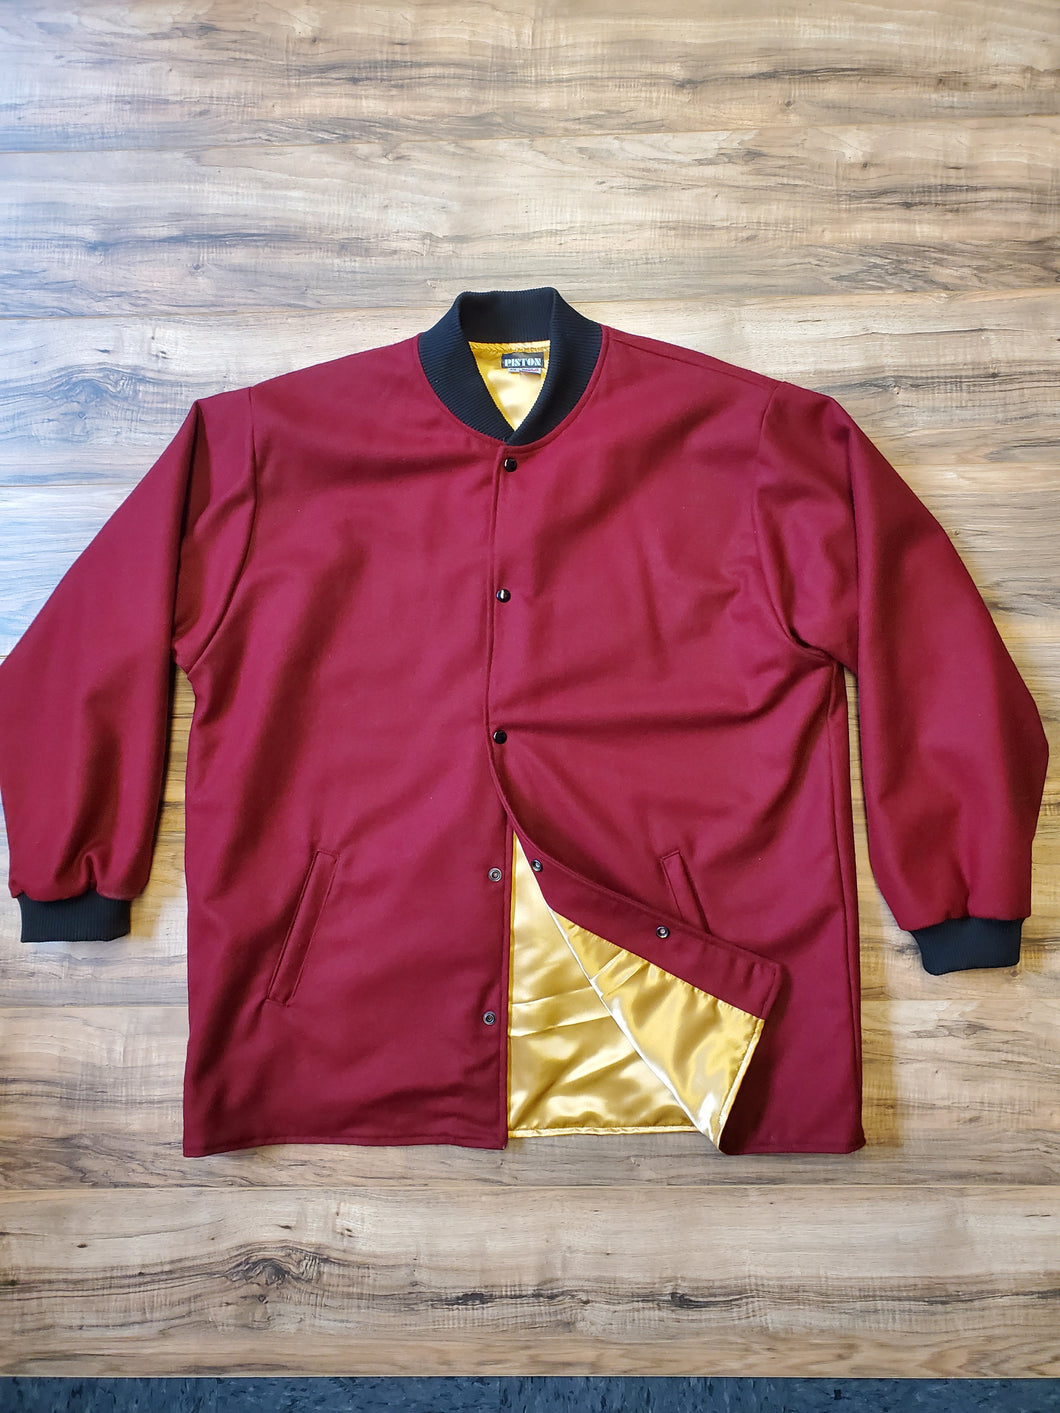 burgundy and gold clicker